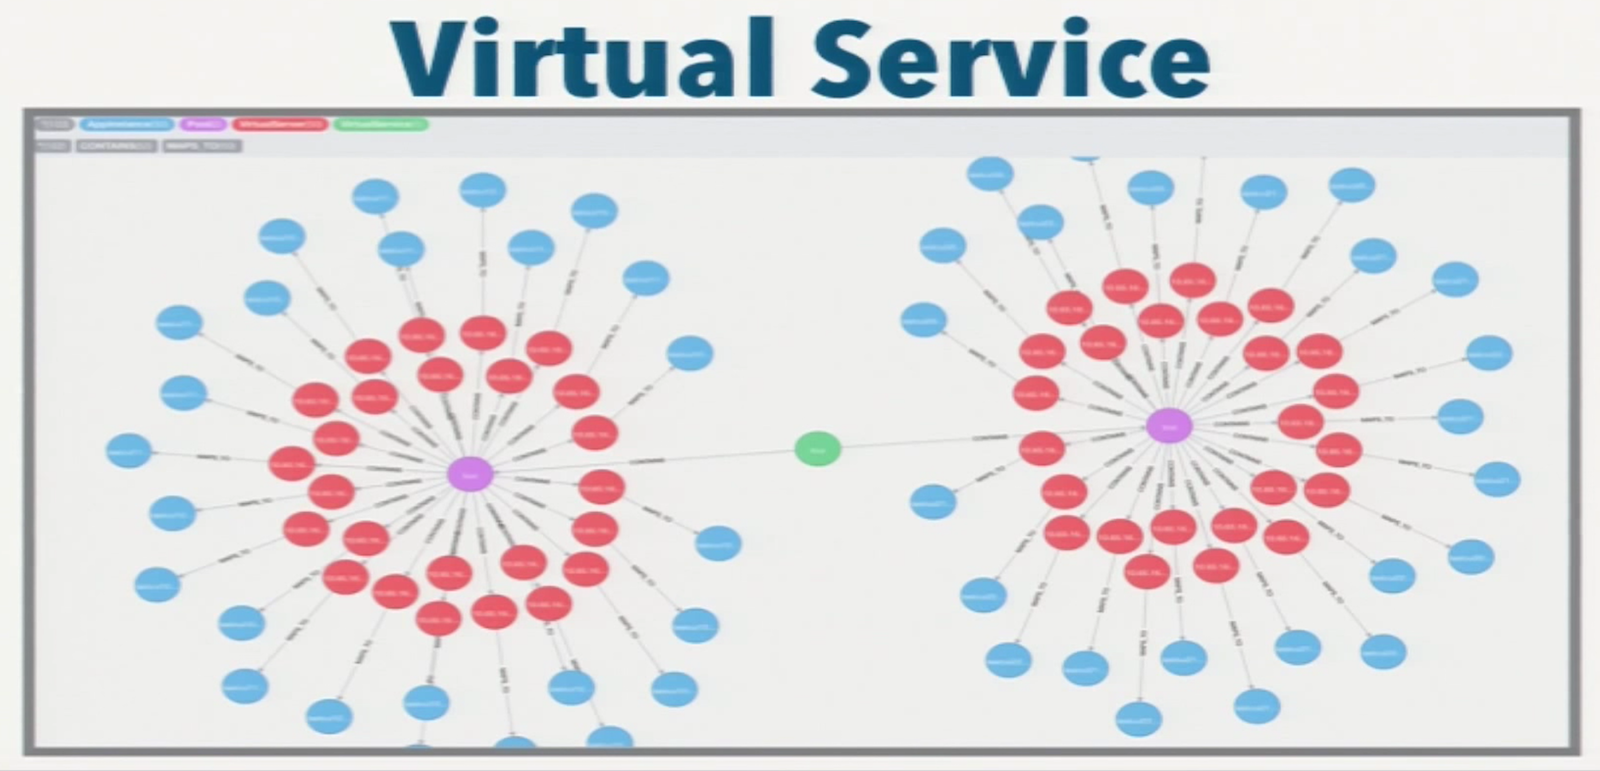 a neo4j data model of virtual services